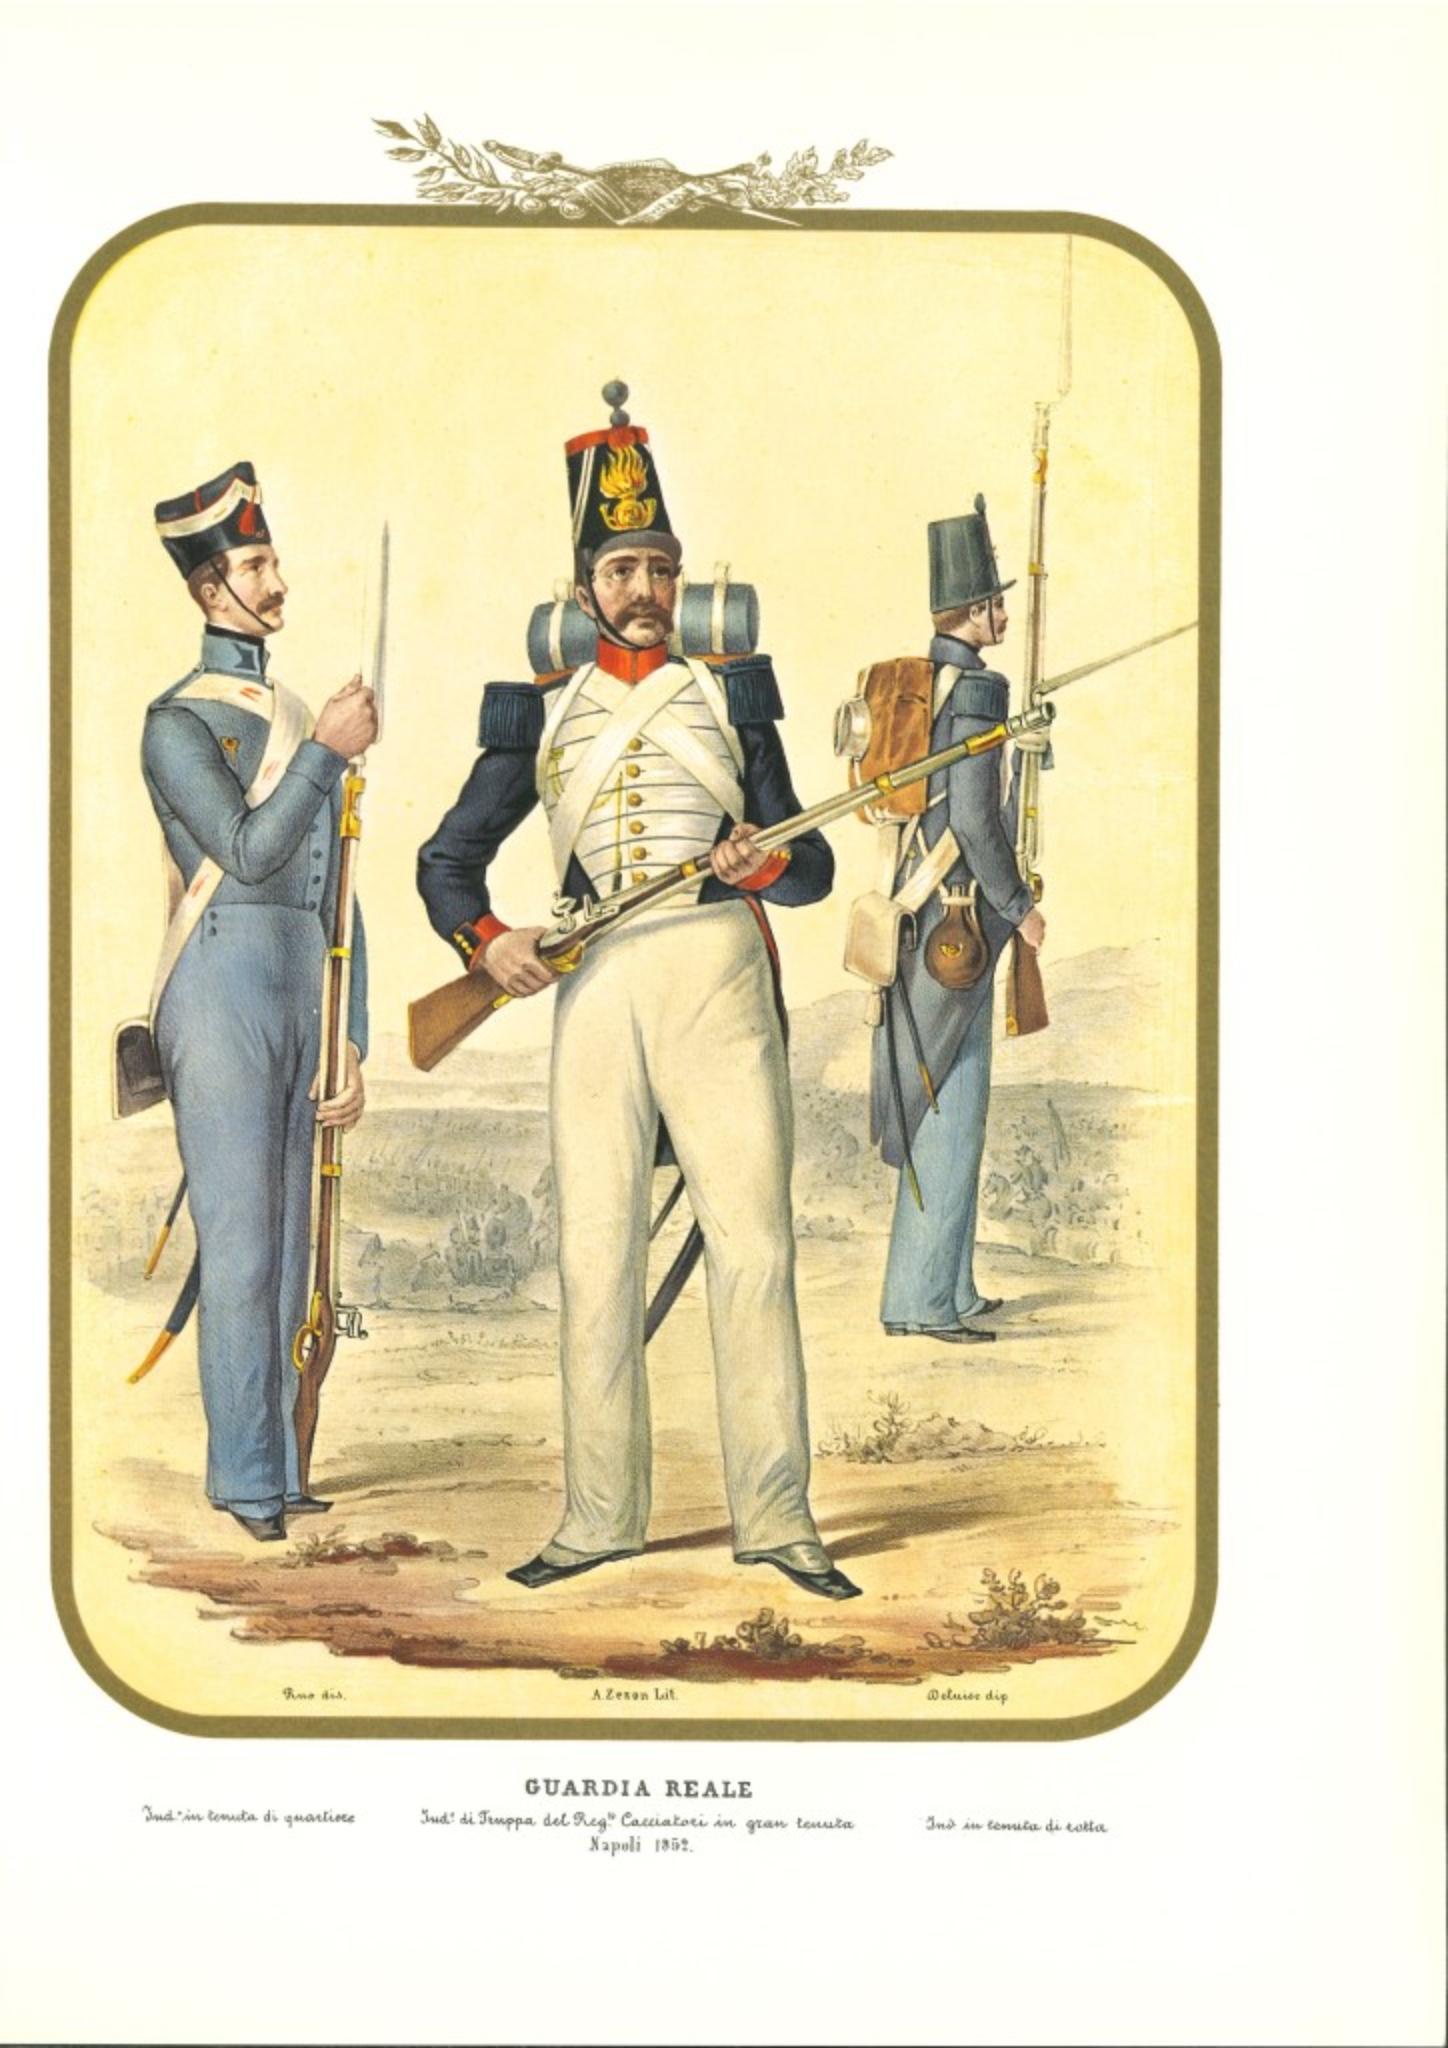 Real Guard is a lithograph by Antonio Zezon. Naples 1852.

Interesting colored lithograph which describes some members of the Real Guard: An Individual in great condition, a Troop Individual of the Regiment Hunters in great dress and an Individual